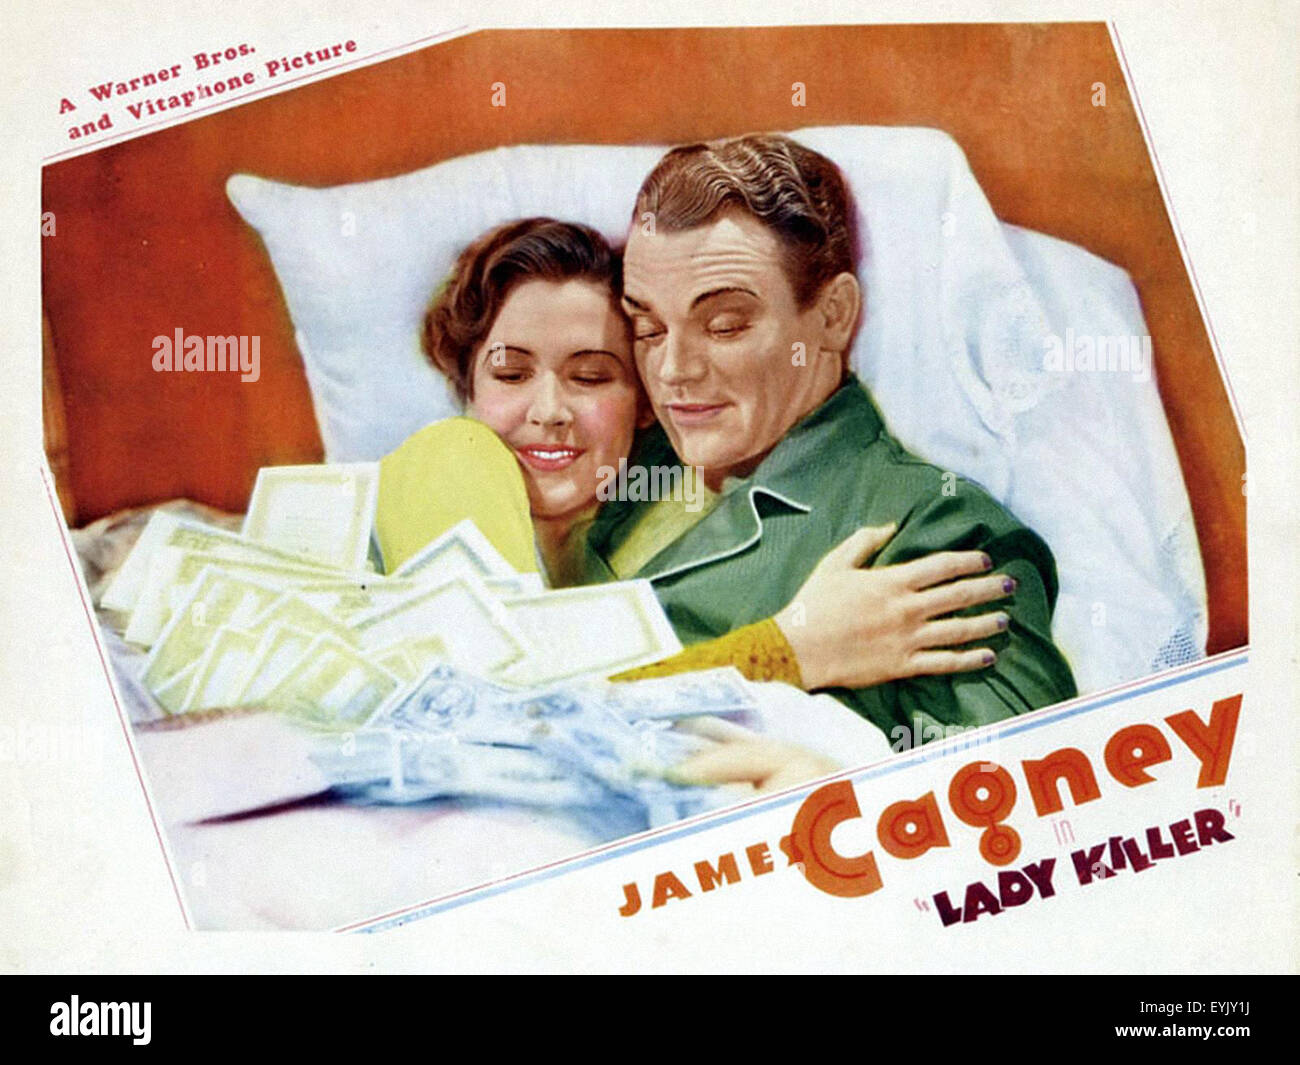 Lady Killer - James Cagney - Movie Poster Stock Photo